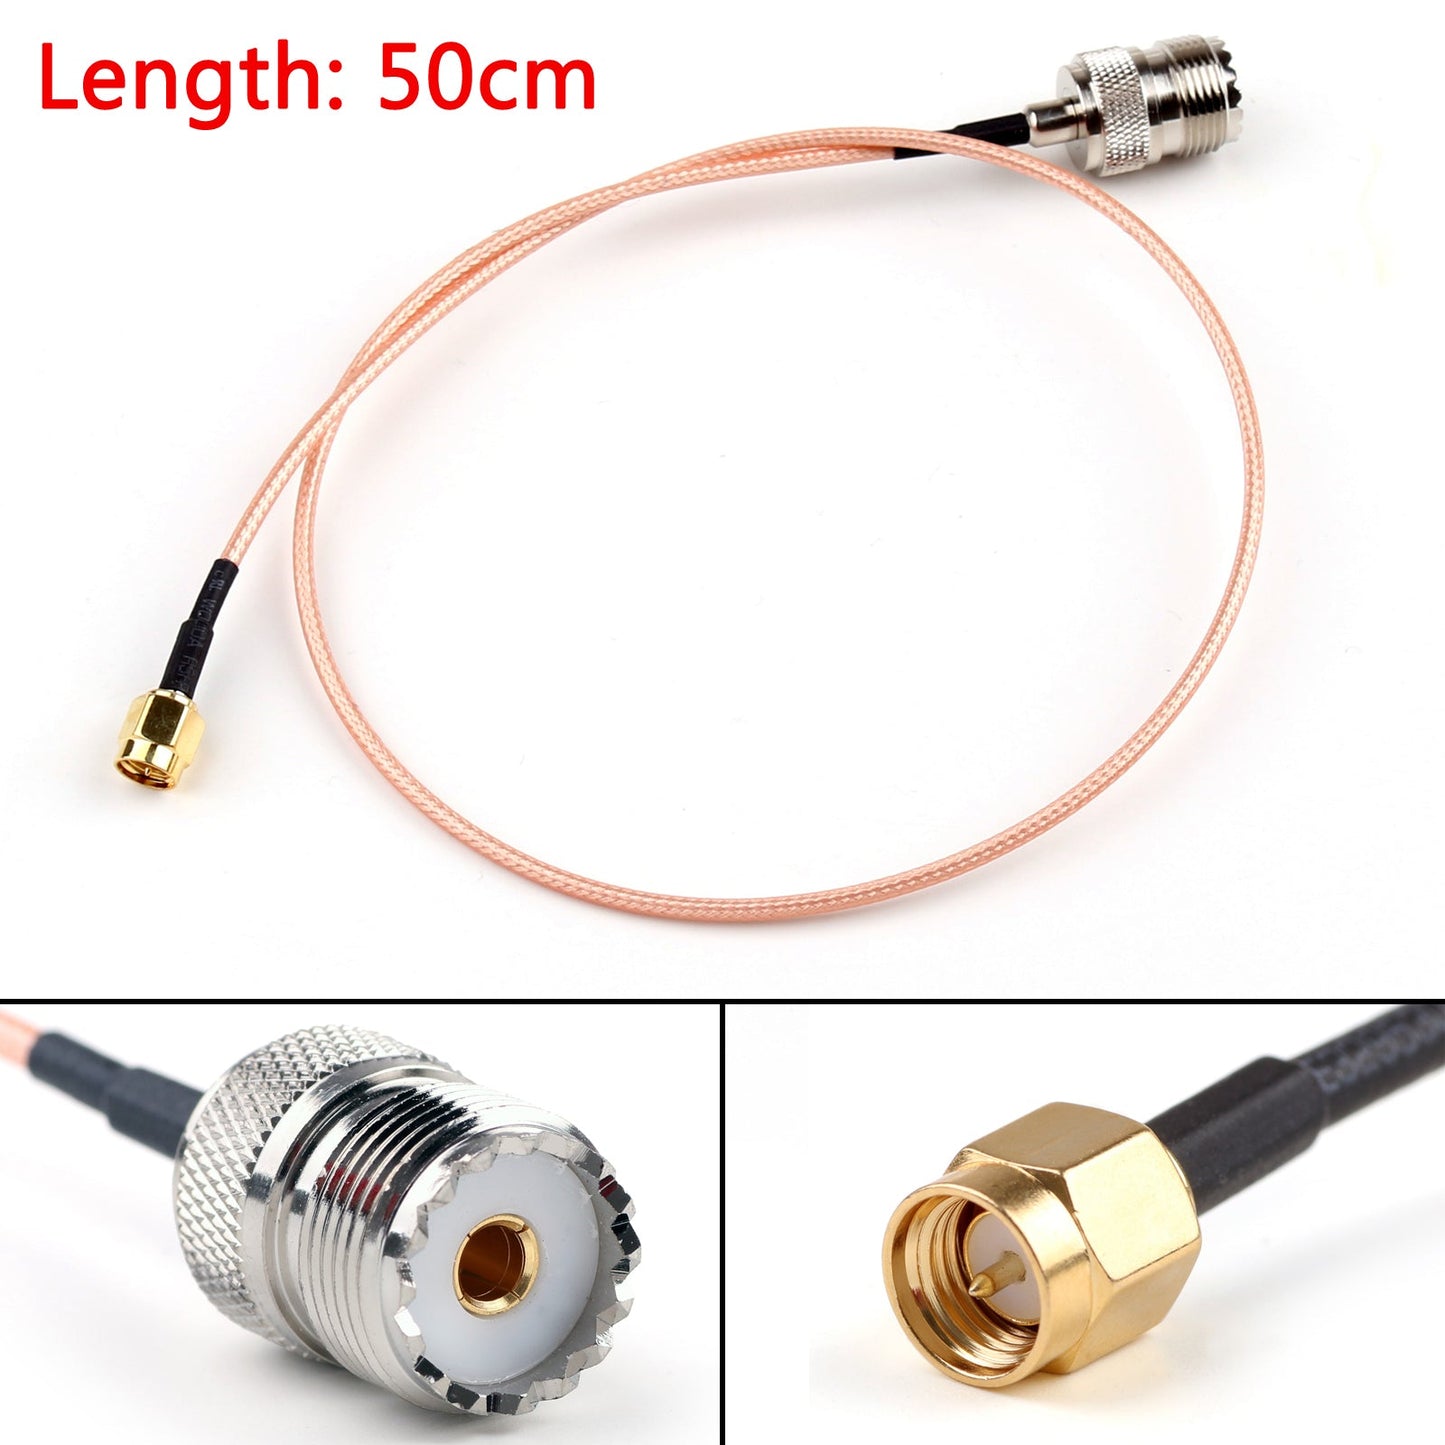 50cm RG316 Cable SMA Male Plug To SO239 UHF Female Jack Straight Pigtail 20in